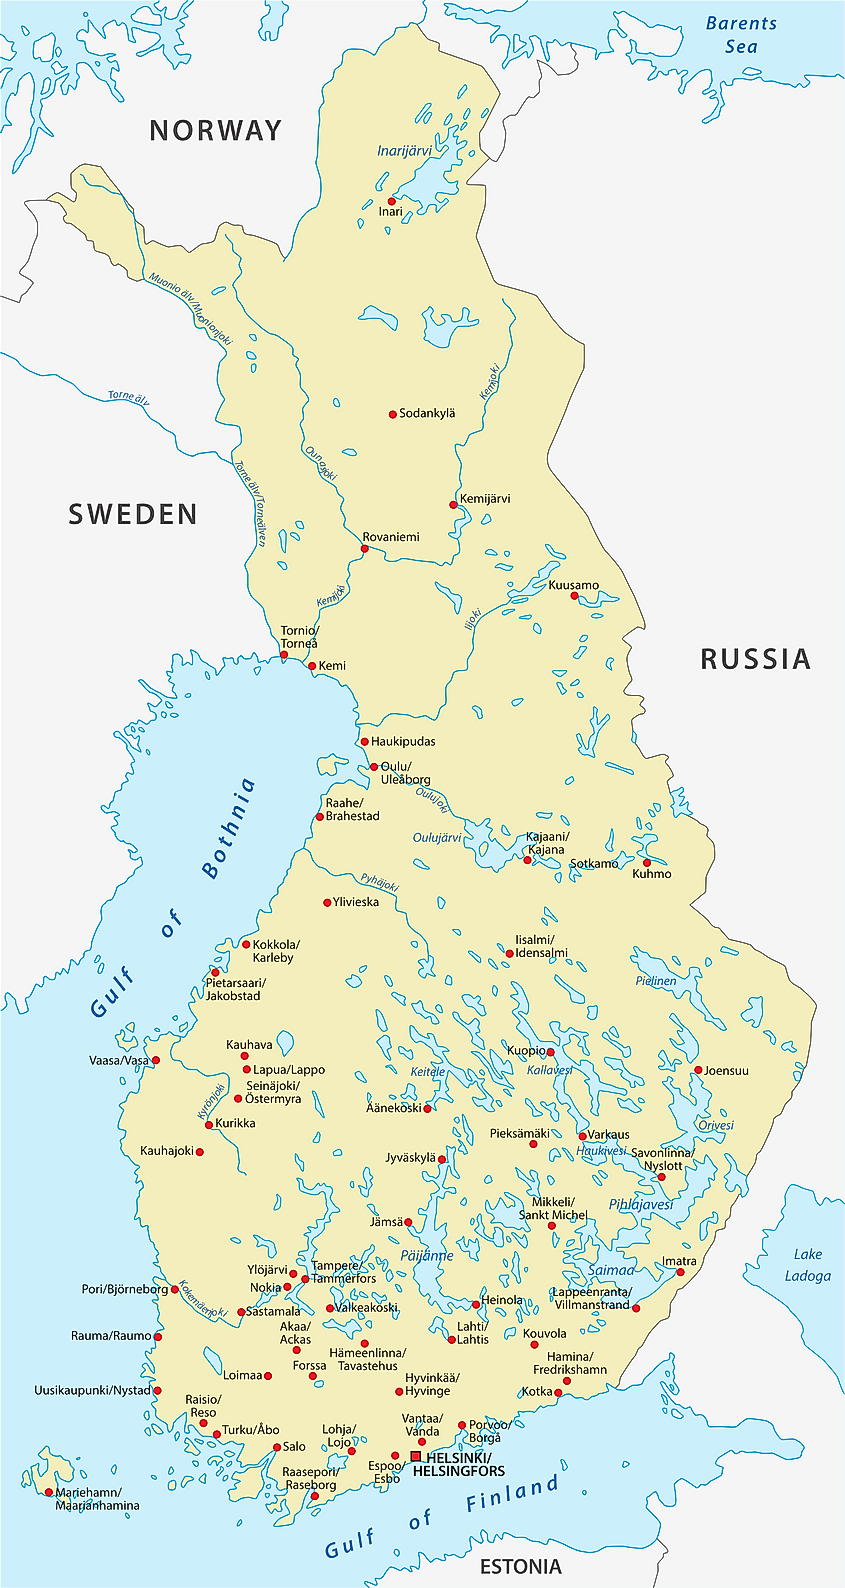 The map of Finland showing the Kemijoki and other rivers.